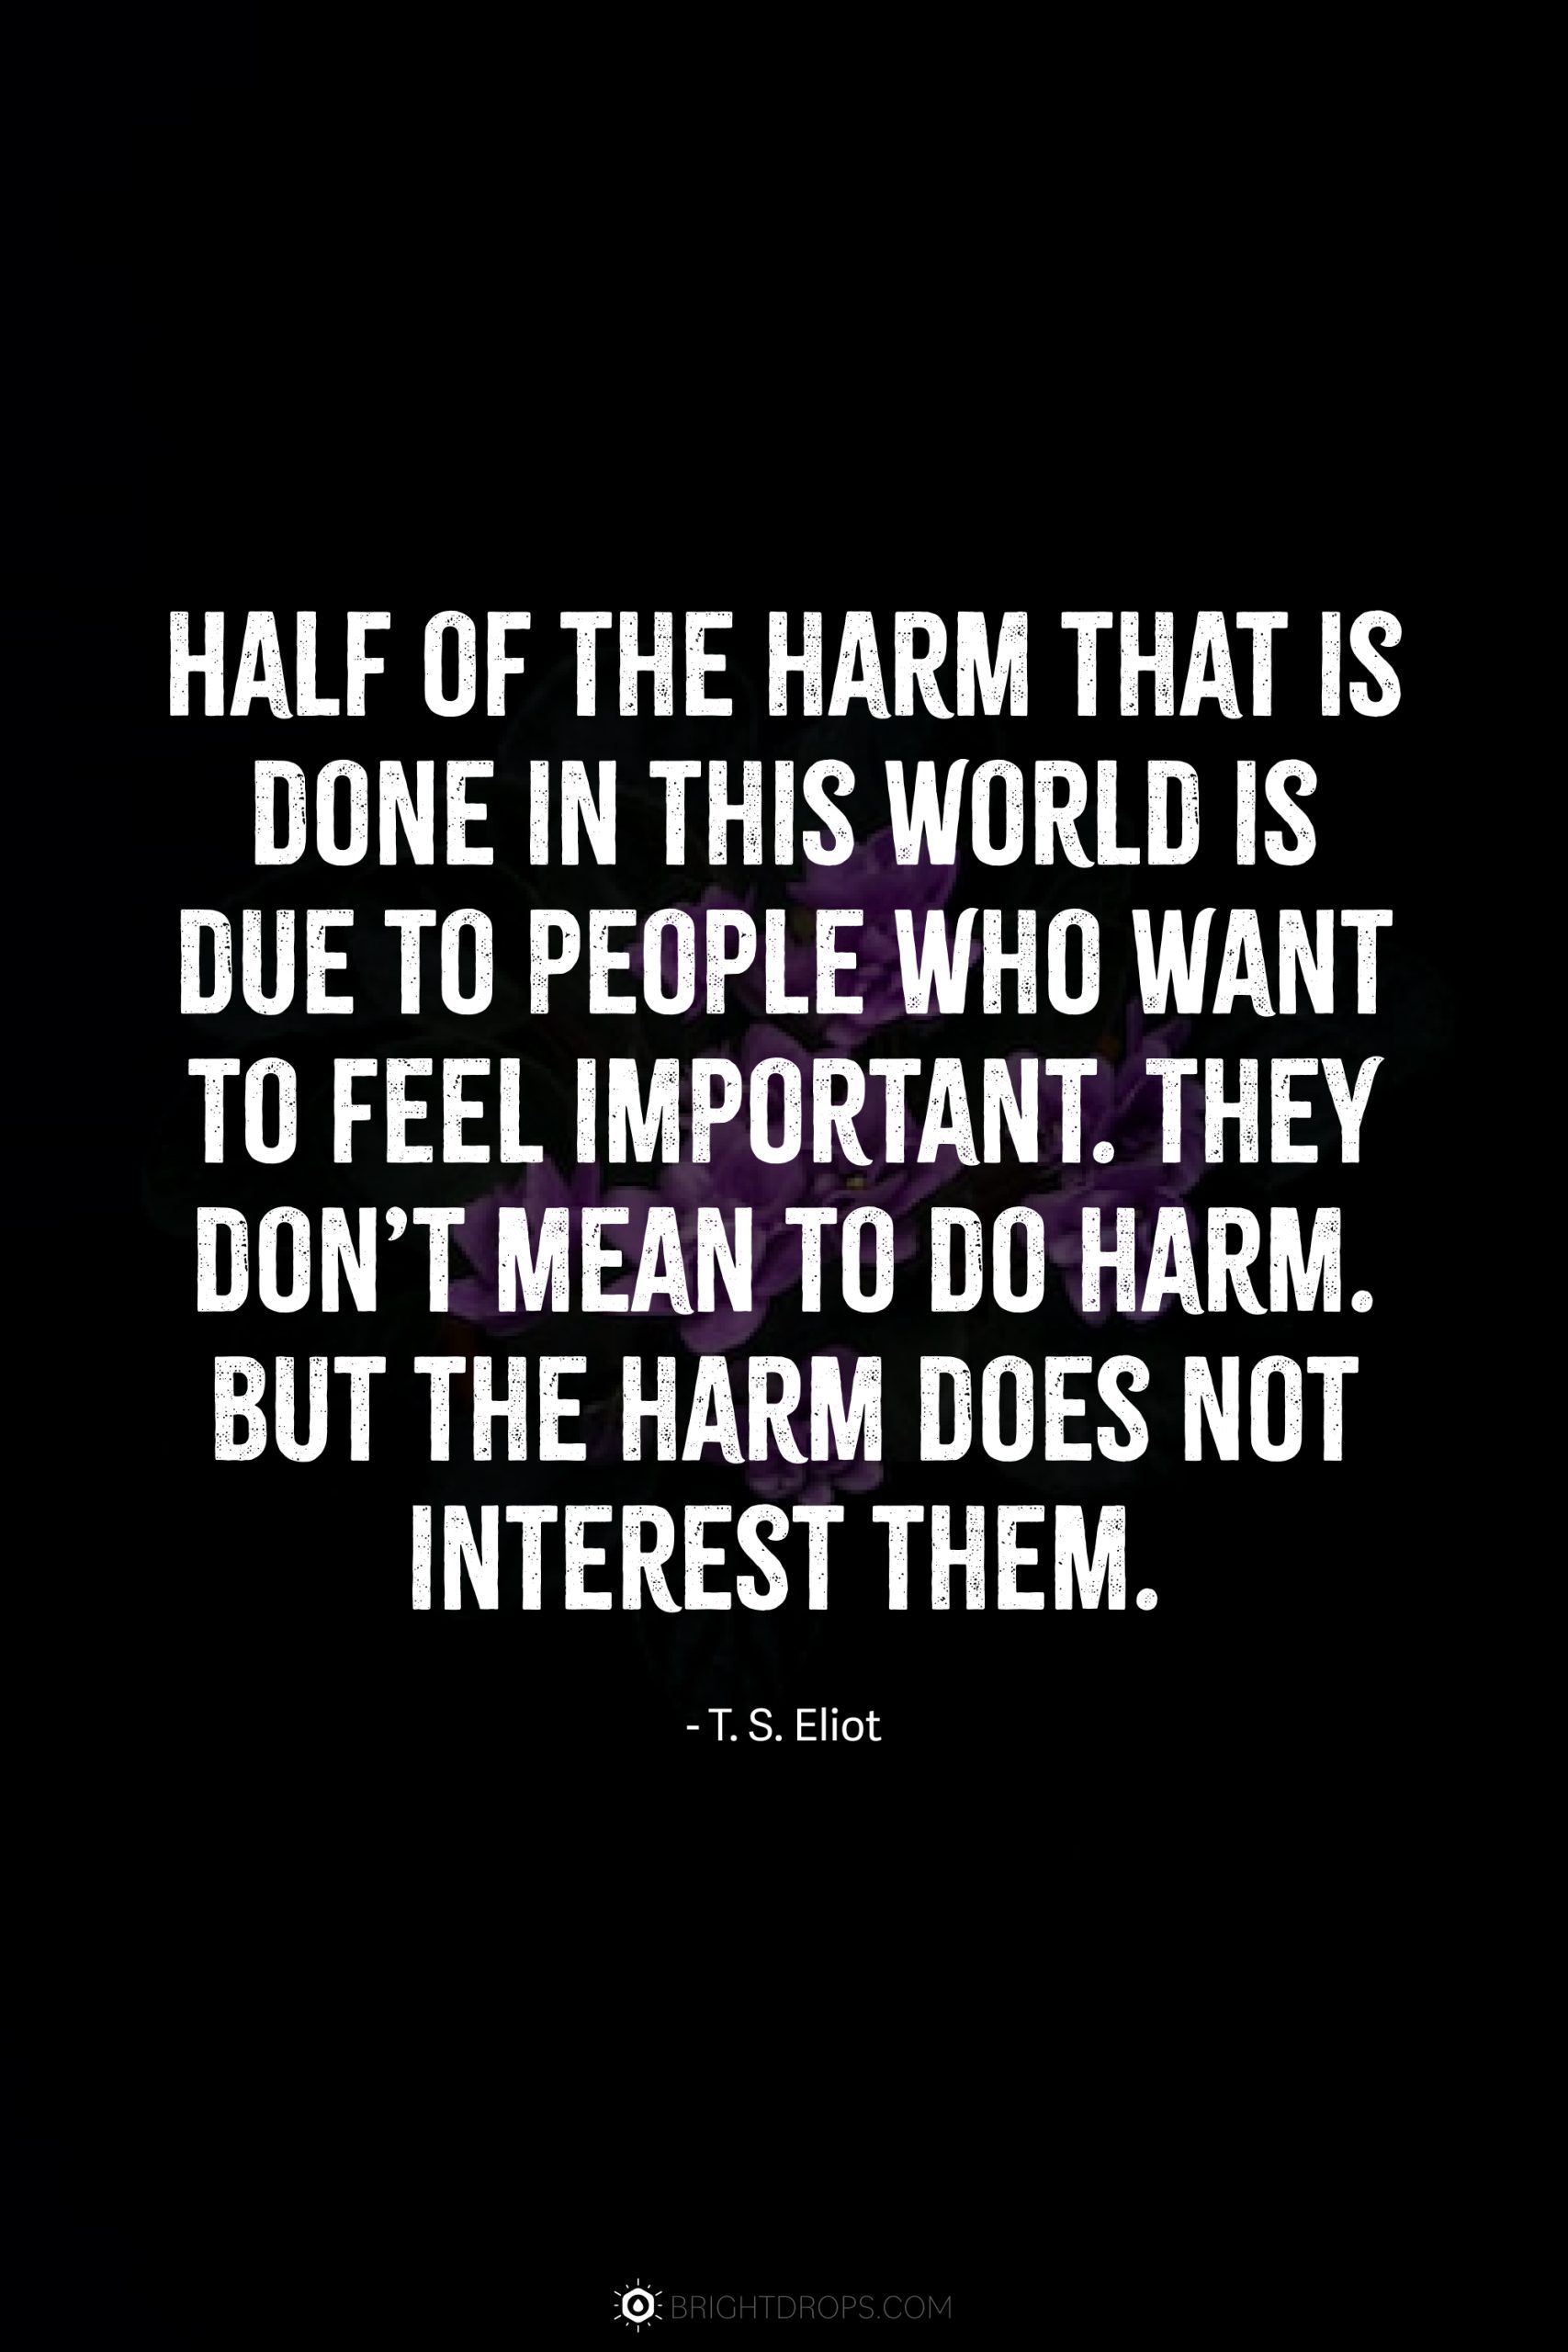 Half of the harm that is done in this world is due to people who want to feel important. They don’t mean to do harm. But the harm does not interest them.